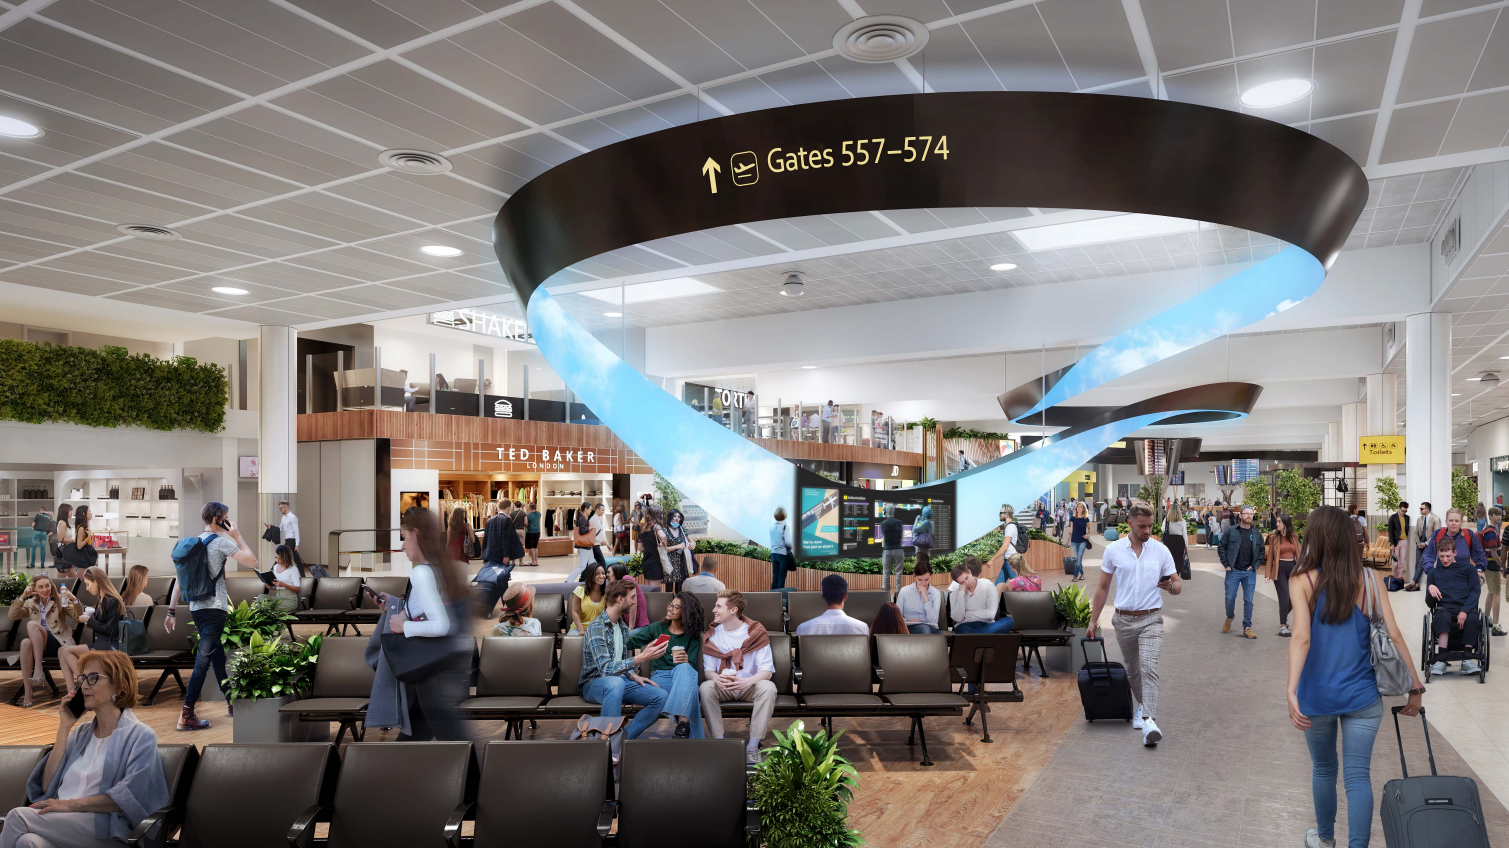 London Gatwick Invests More than £10 million to Ttransform Passenger Experience